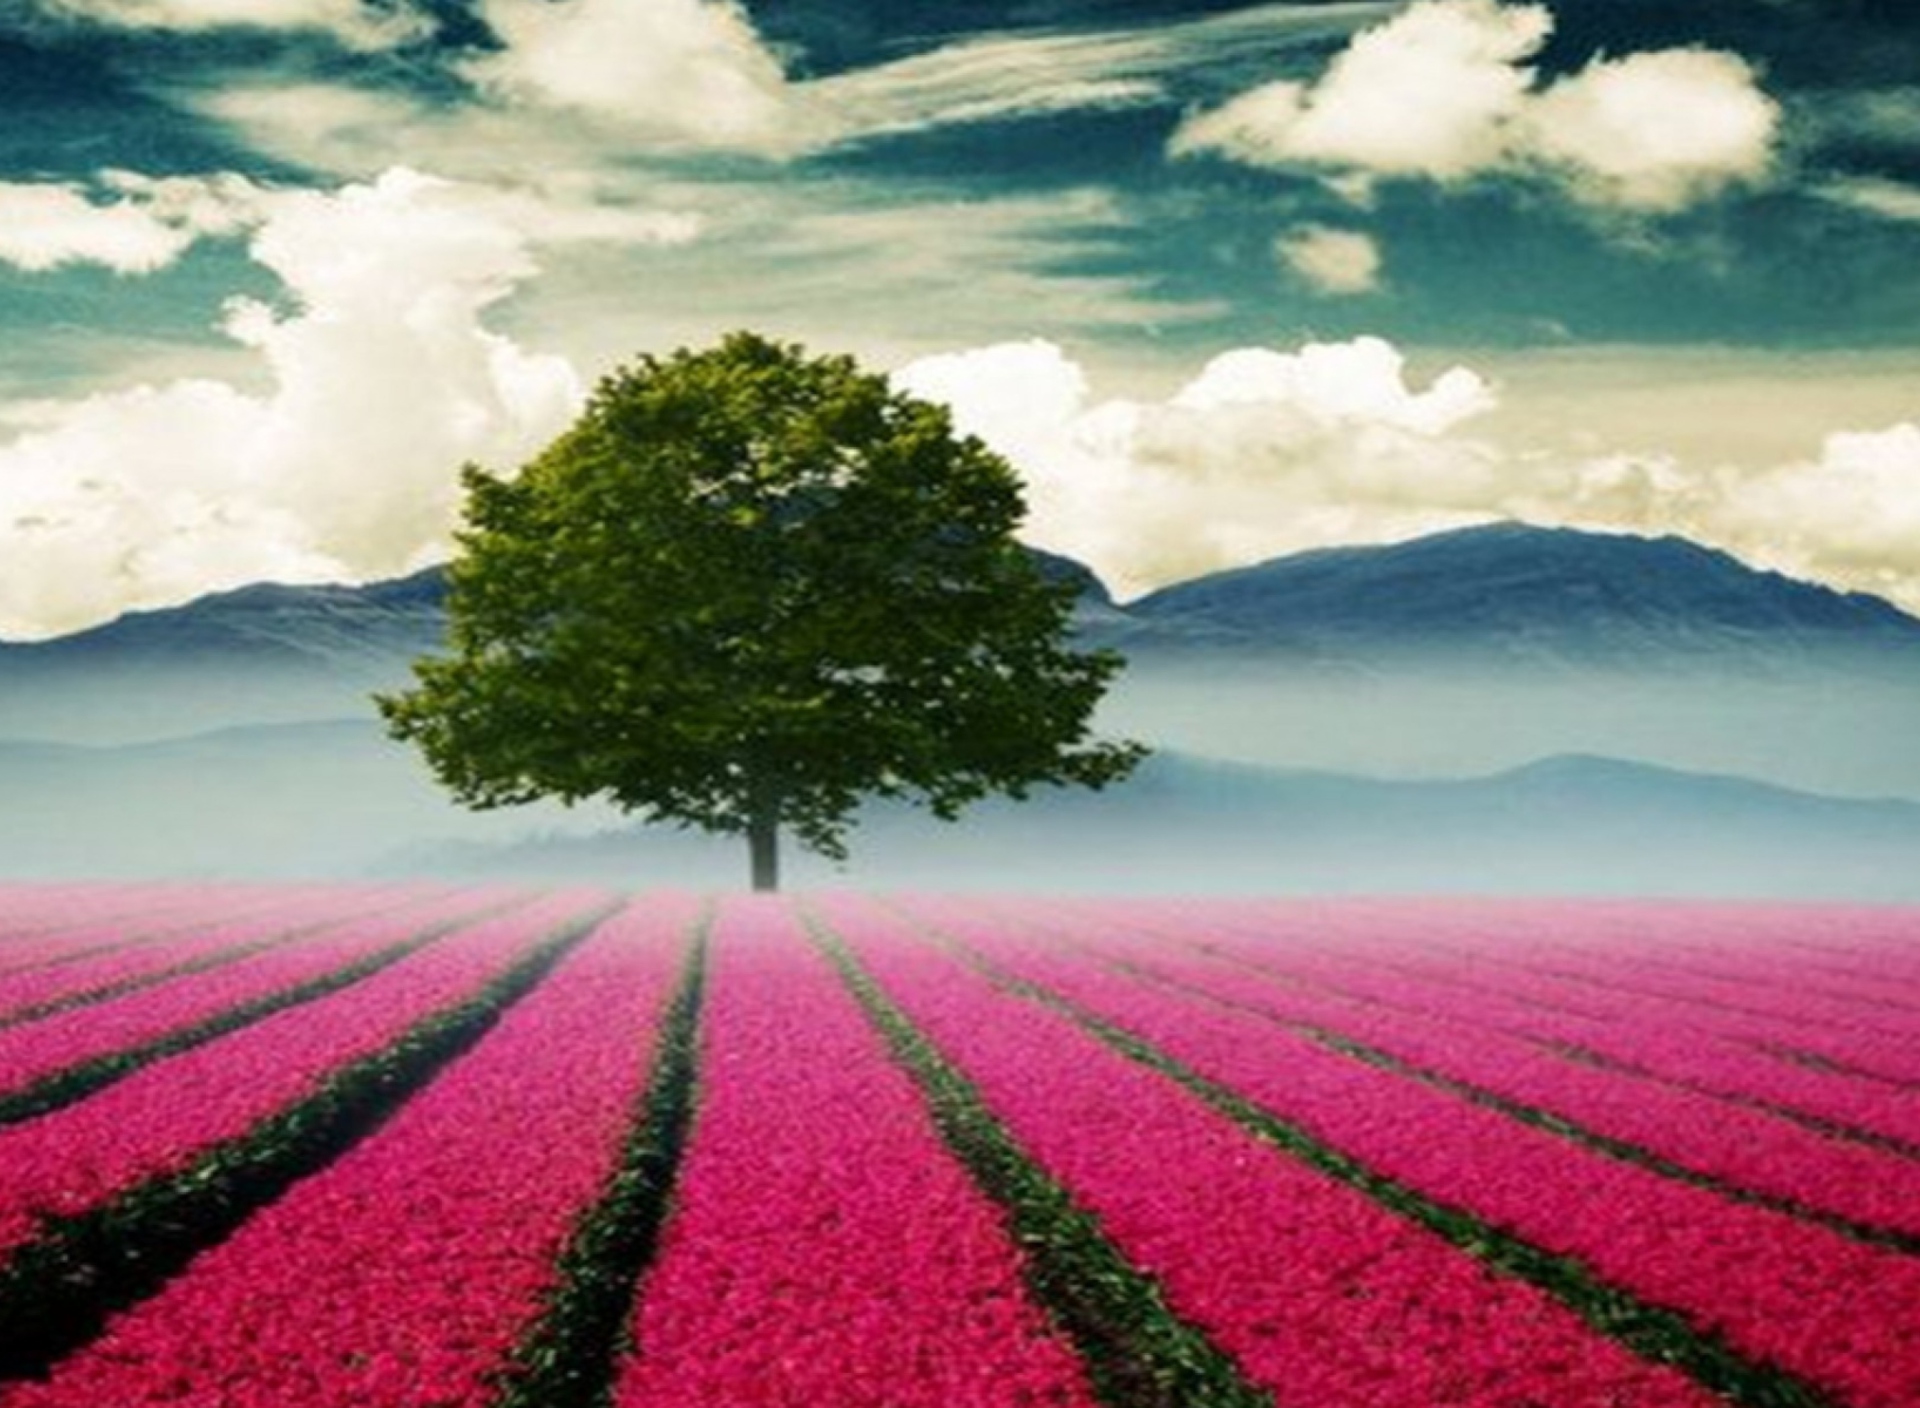 Beautiful Landscape With Tree And Pink Flower Field screenshot #1 1920x1408